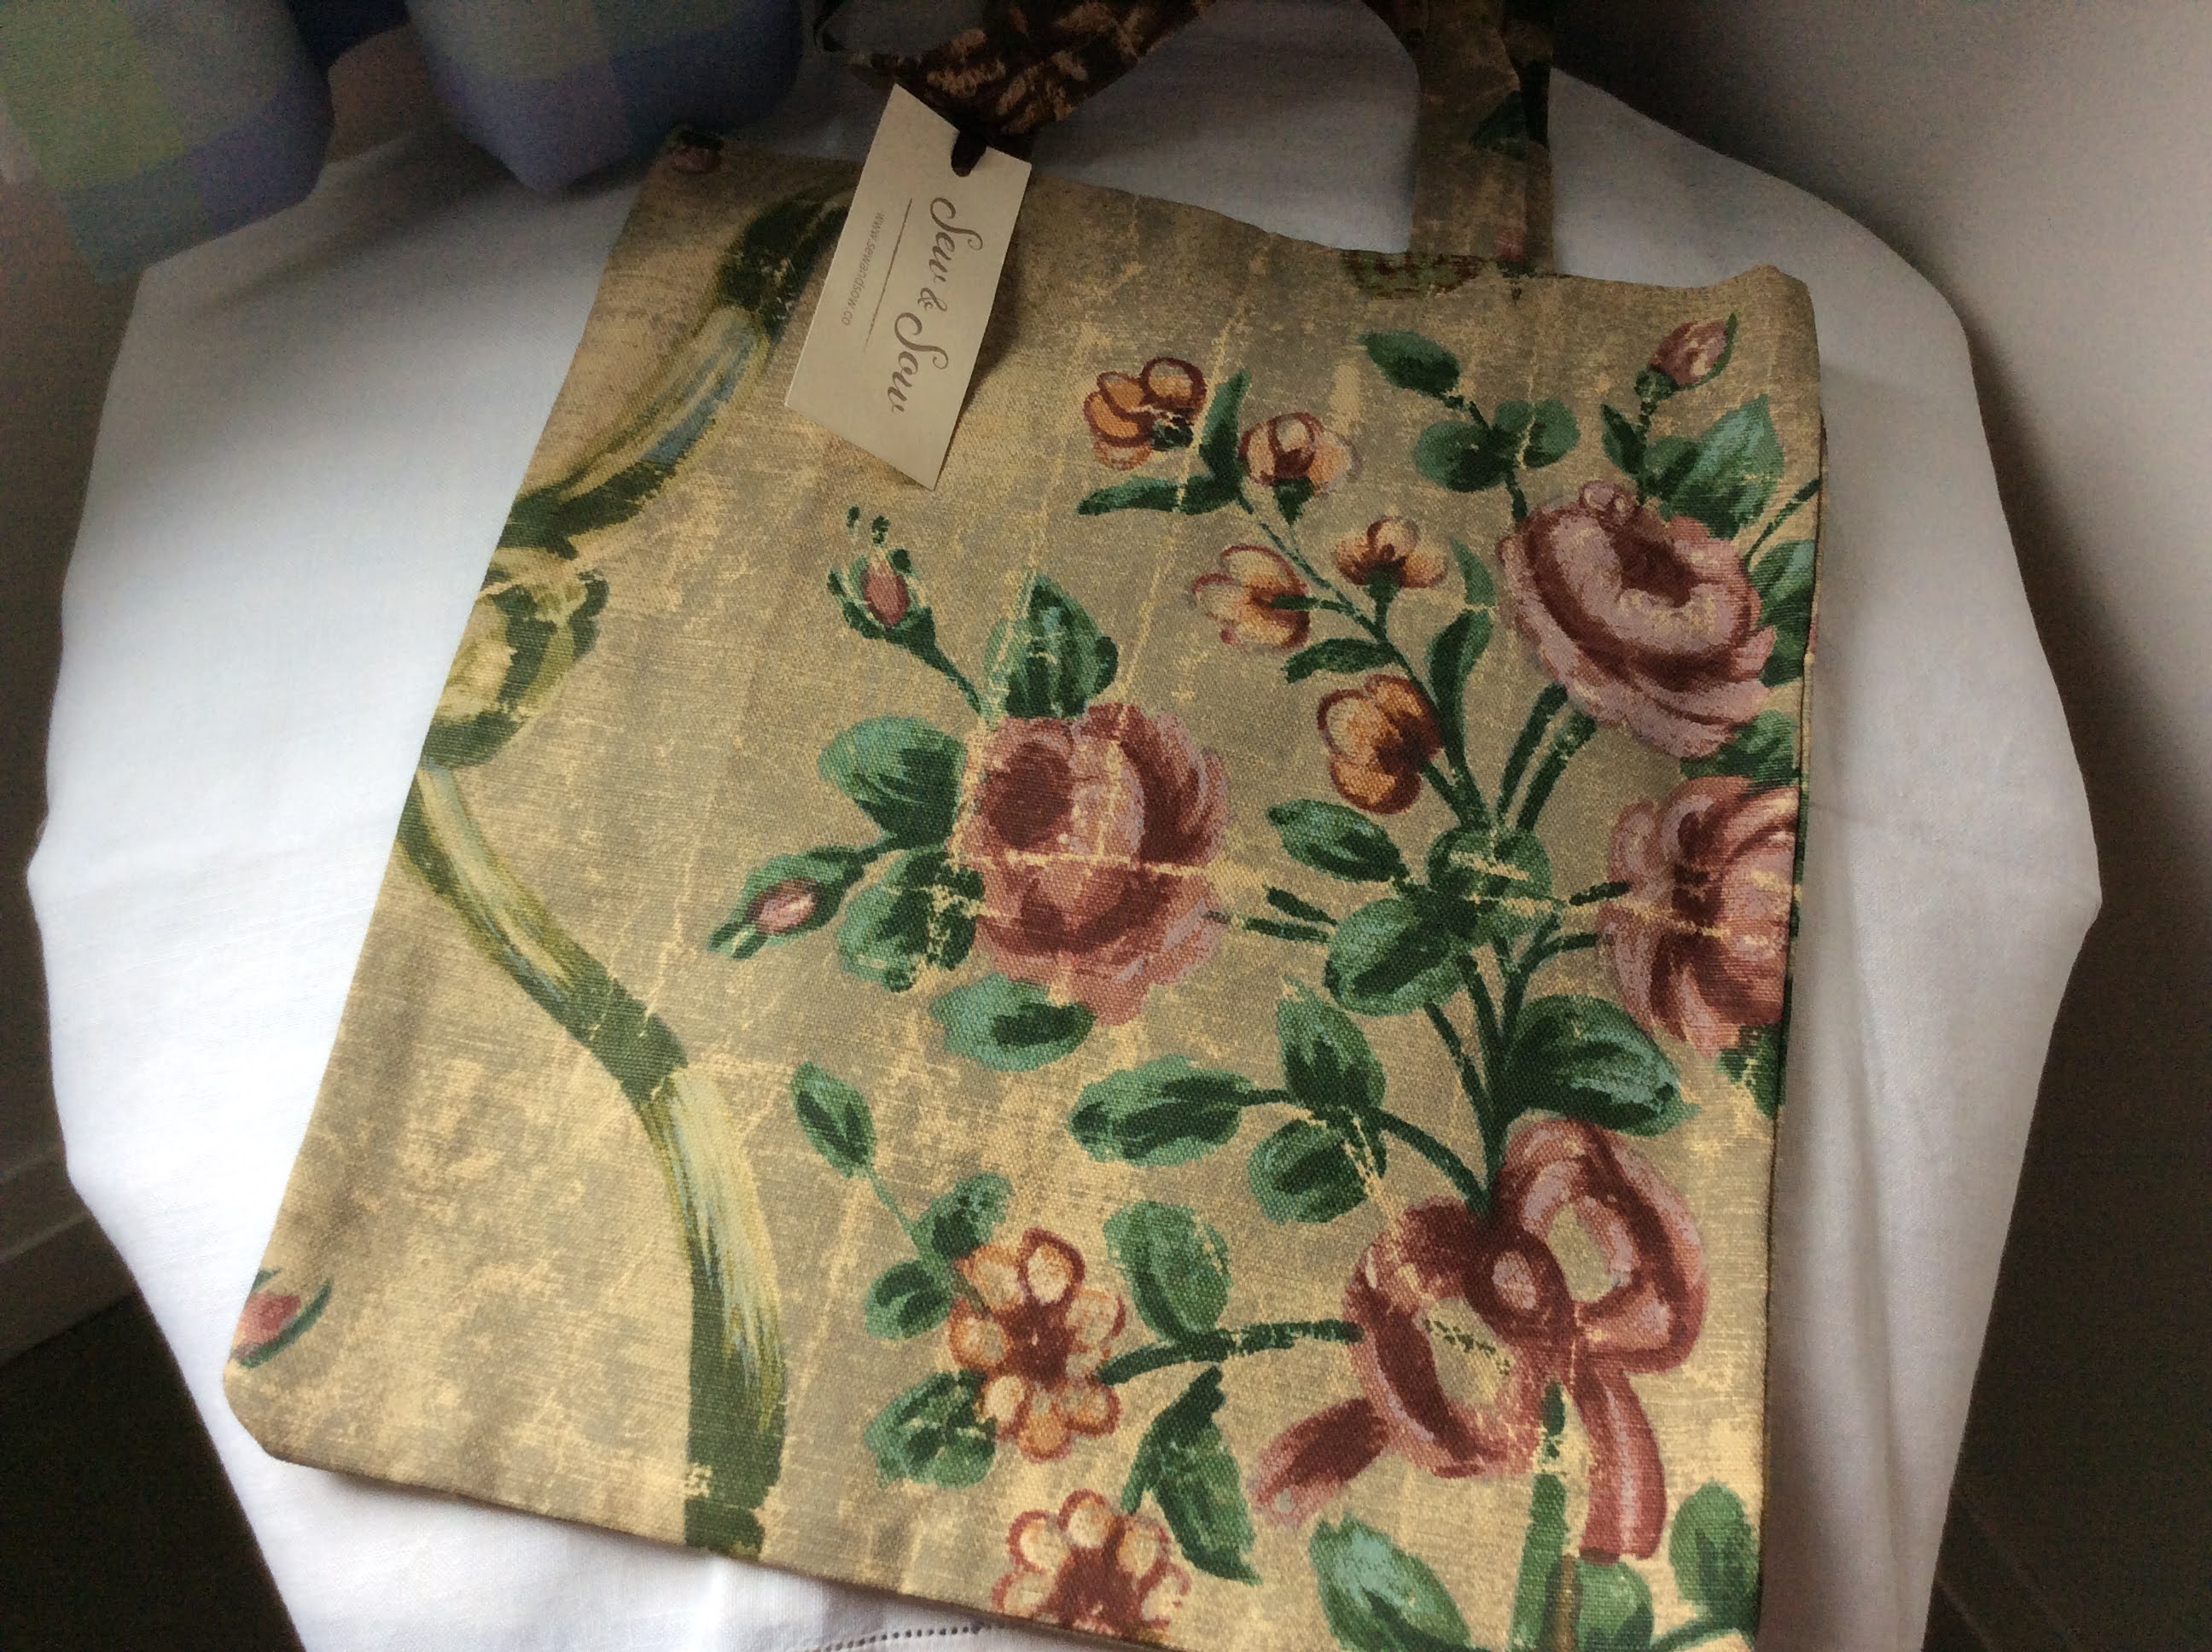 Tote Bag - faded flower